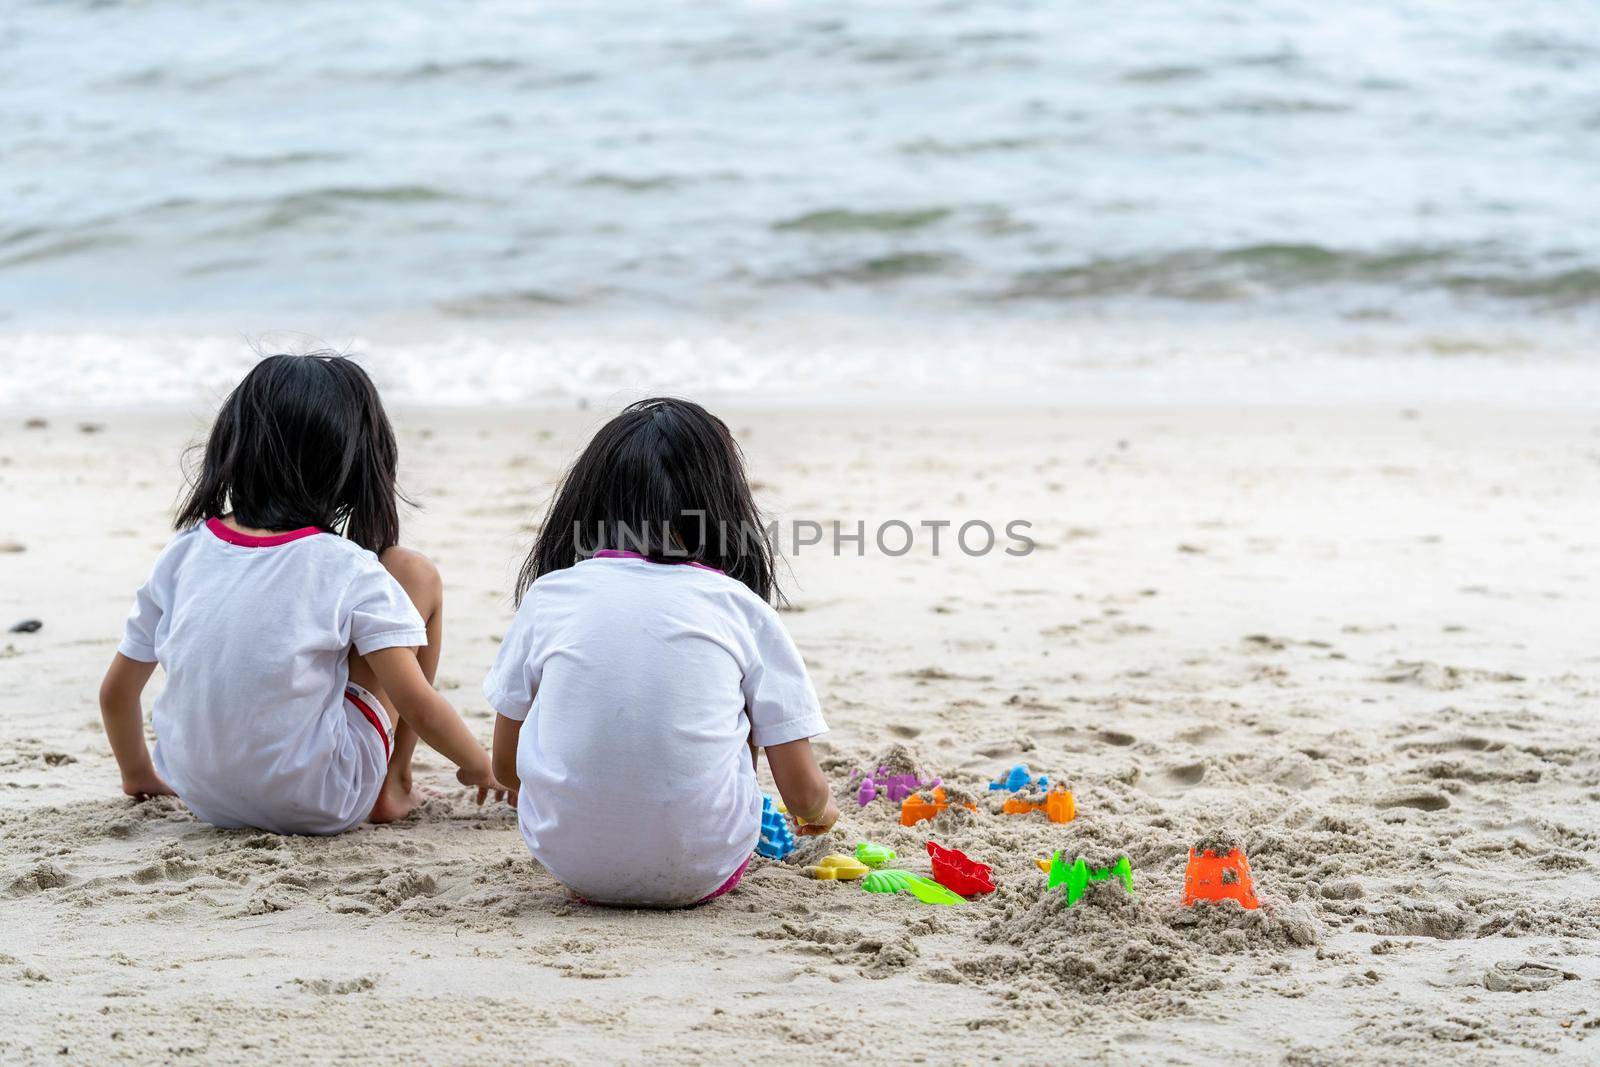 Twin girls while playing beach toys and sitting on a beach sand with white sand and waves by billroque